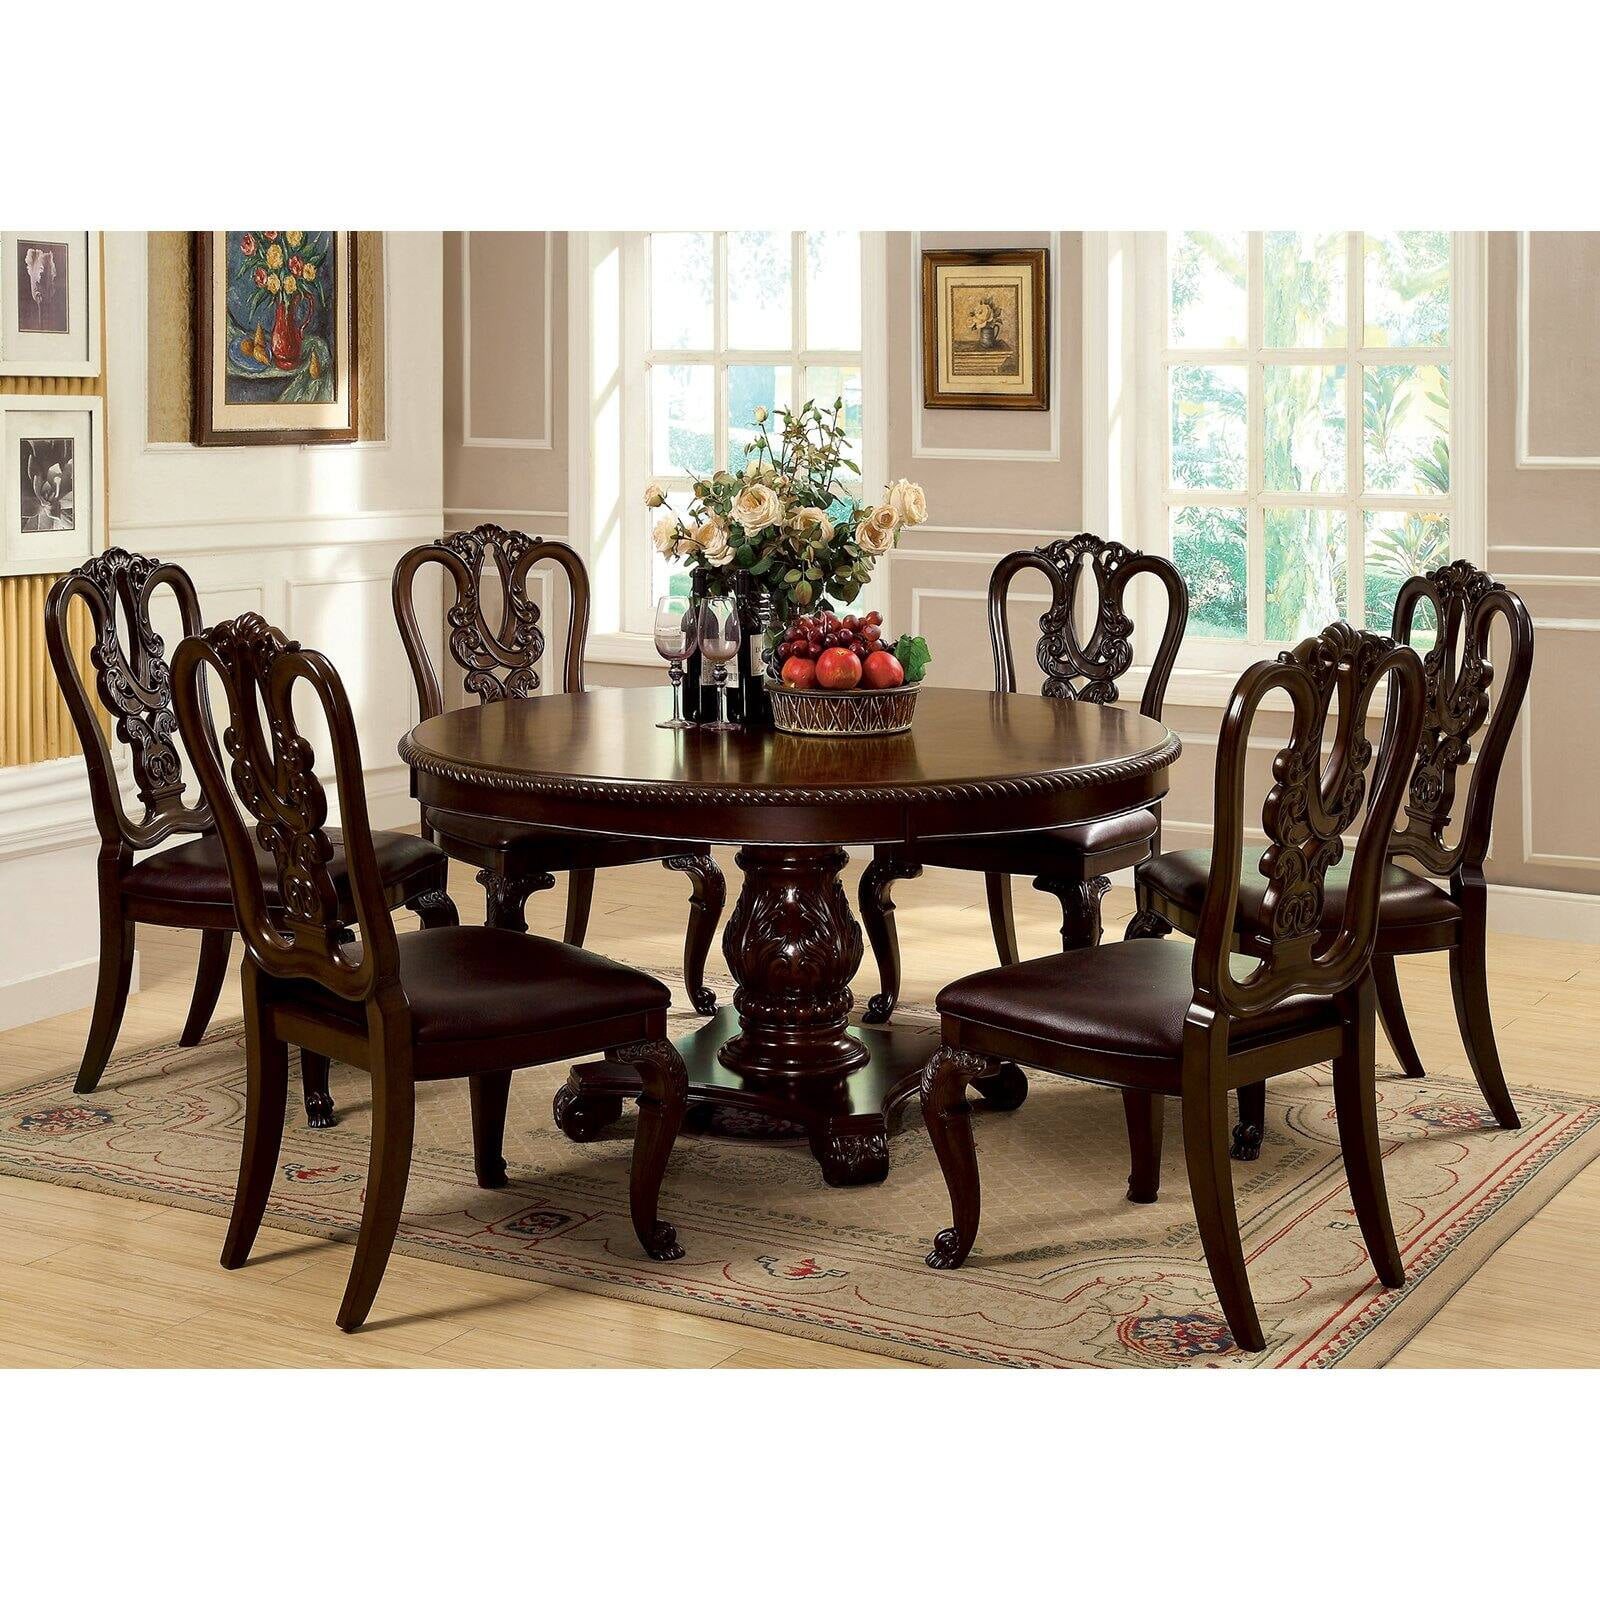 Furniture Of America Berkshire 7 Piece, Round Dining Room Table Sets With Leaf